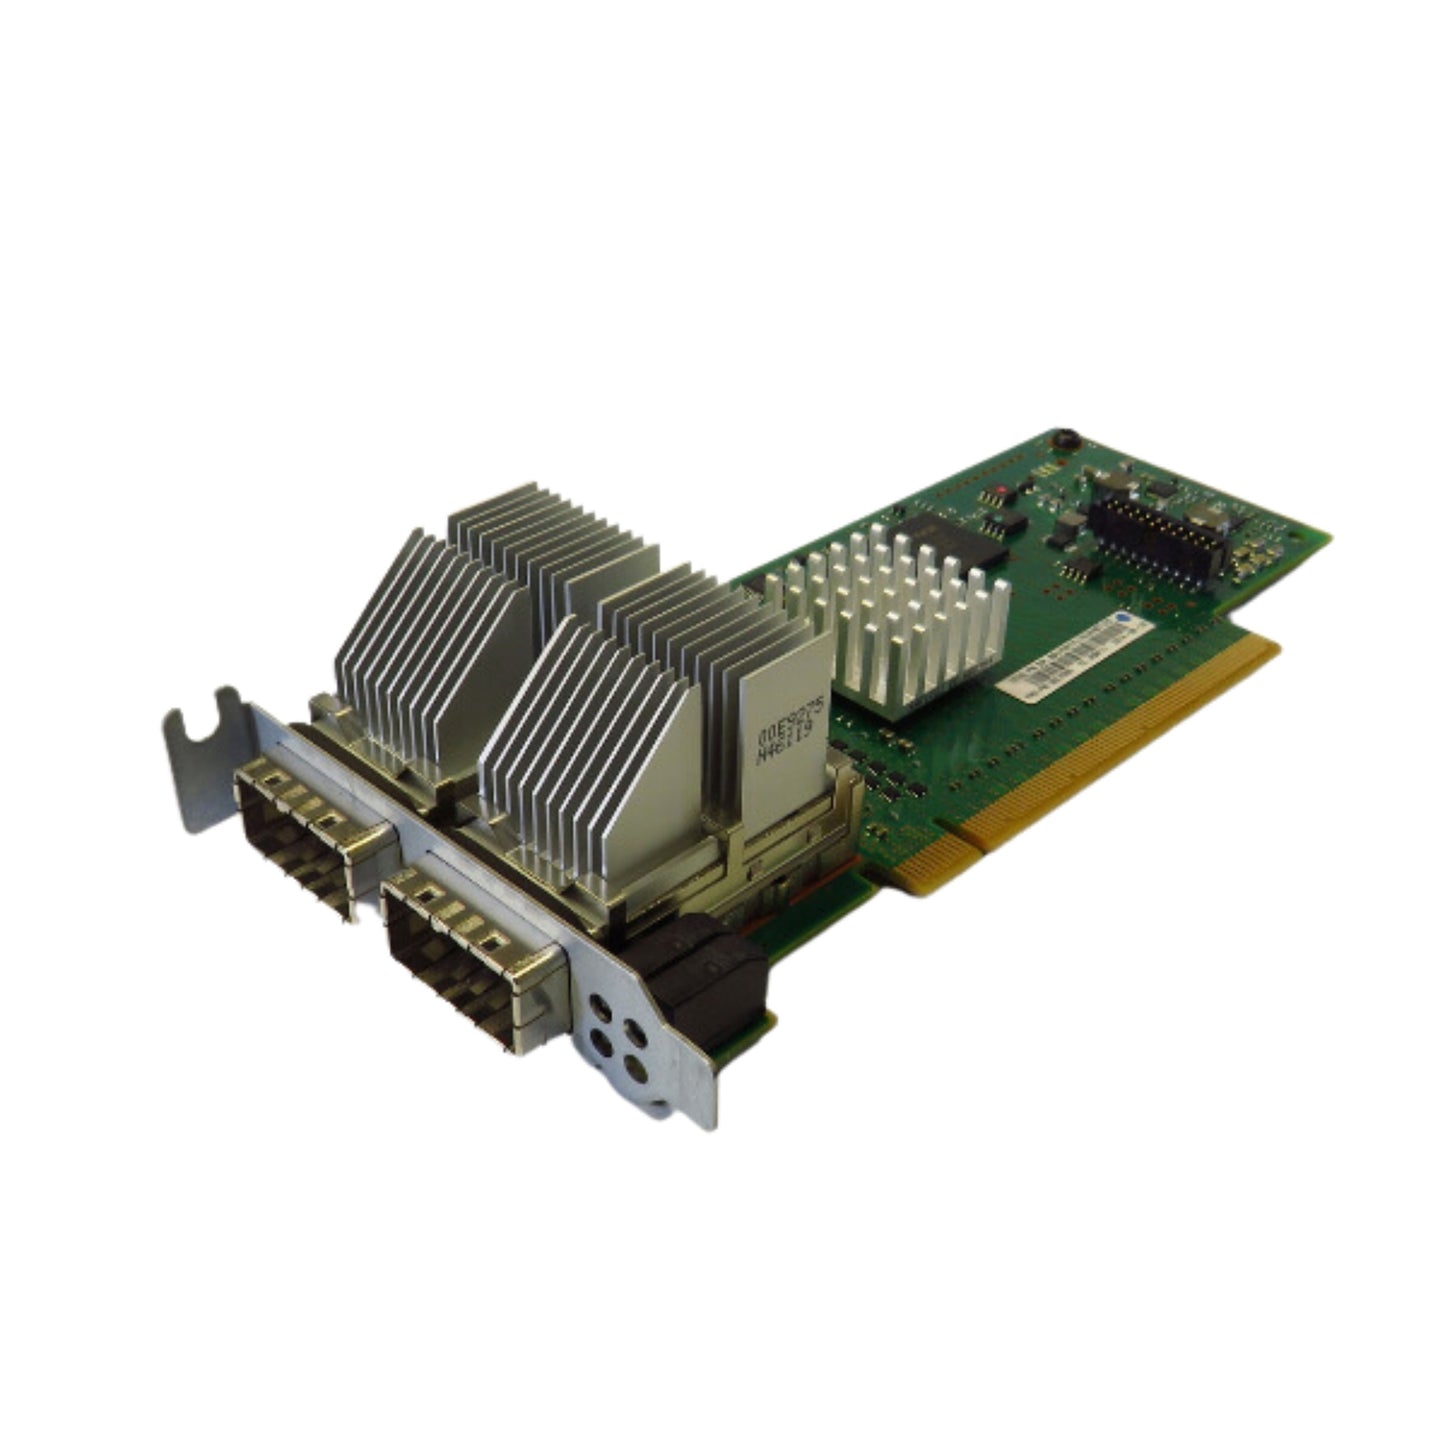 IBM 00LY090 6B52 EJ07 PCIe3 Optical Cable Adapter Card (Refurbished)